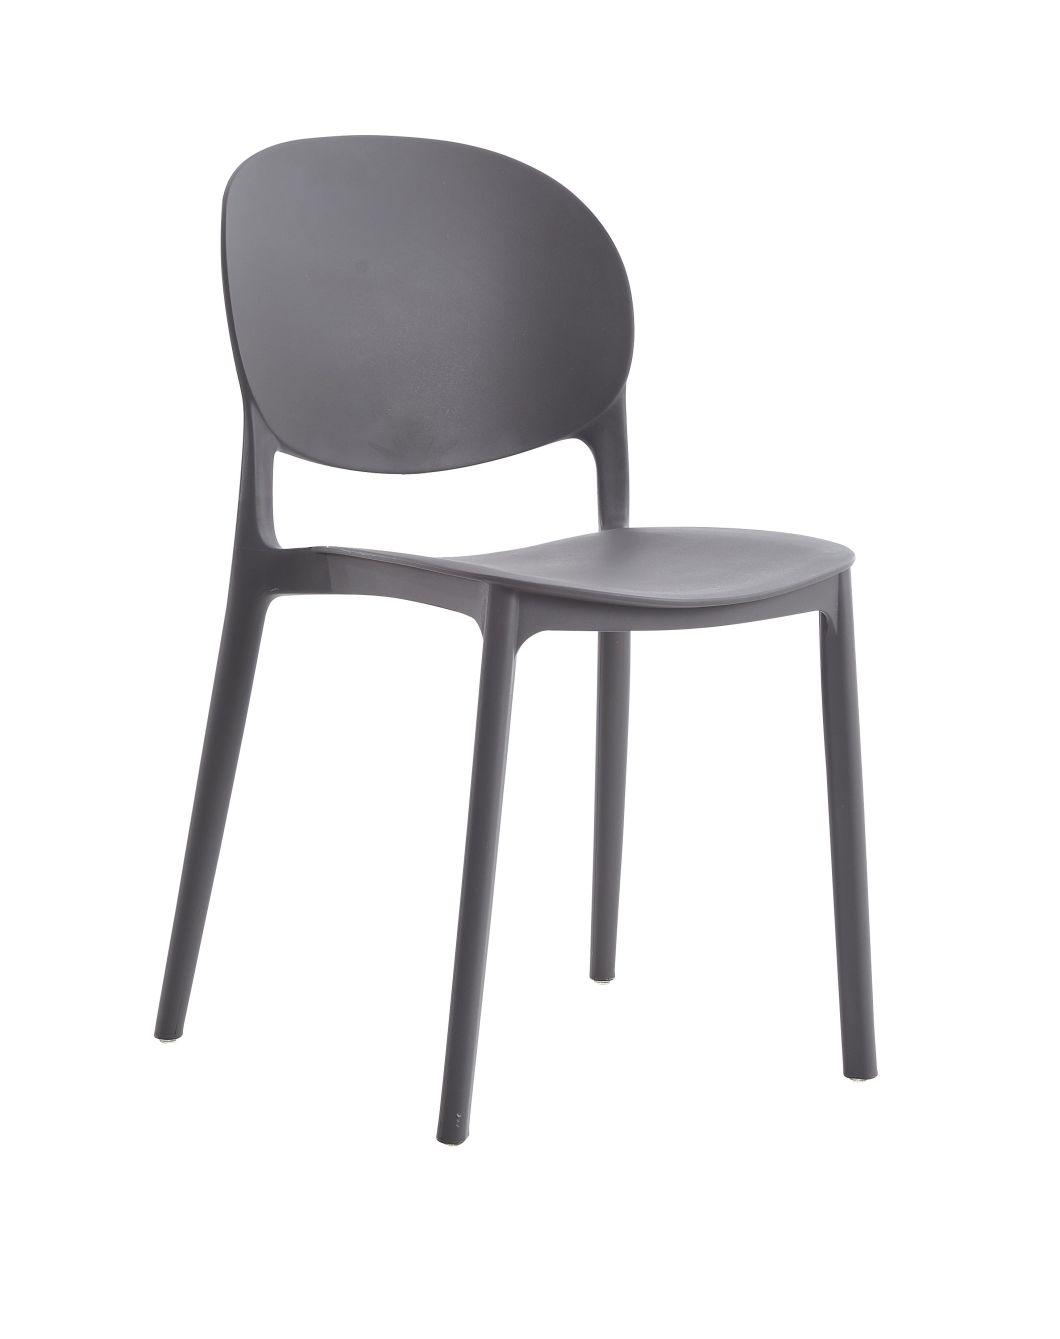 Wholesale Outdoor Tranparent Plastic PC Banquet Dining Room Furniture Dining Chair Modern for Wedding